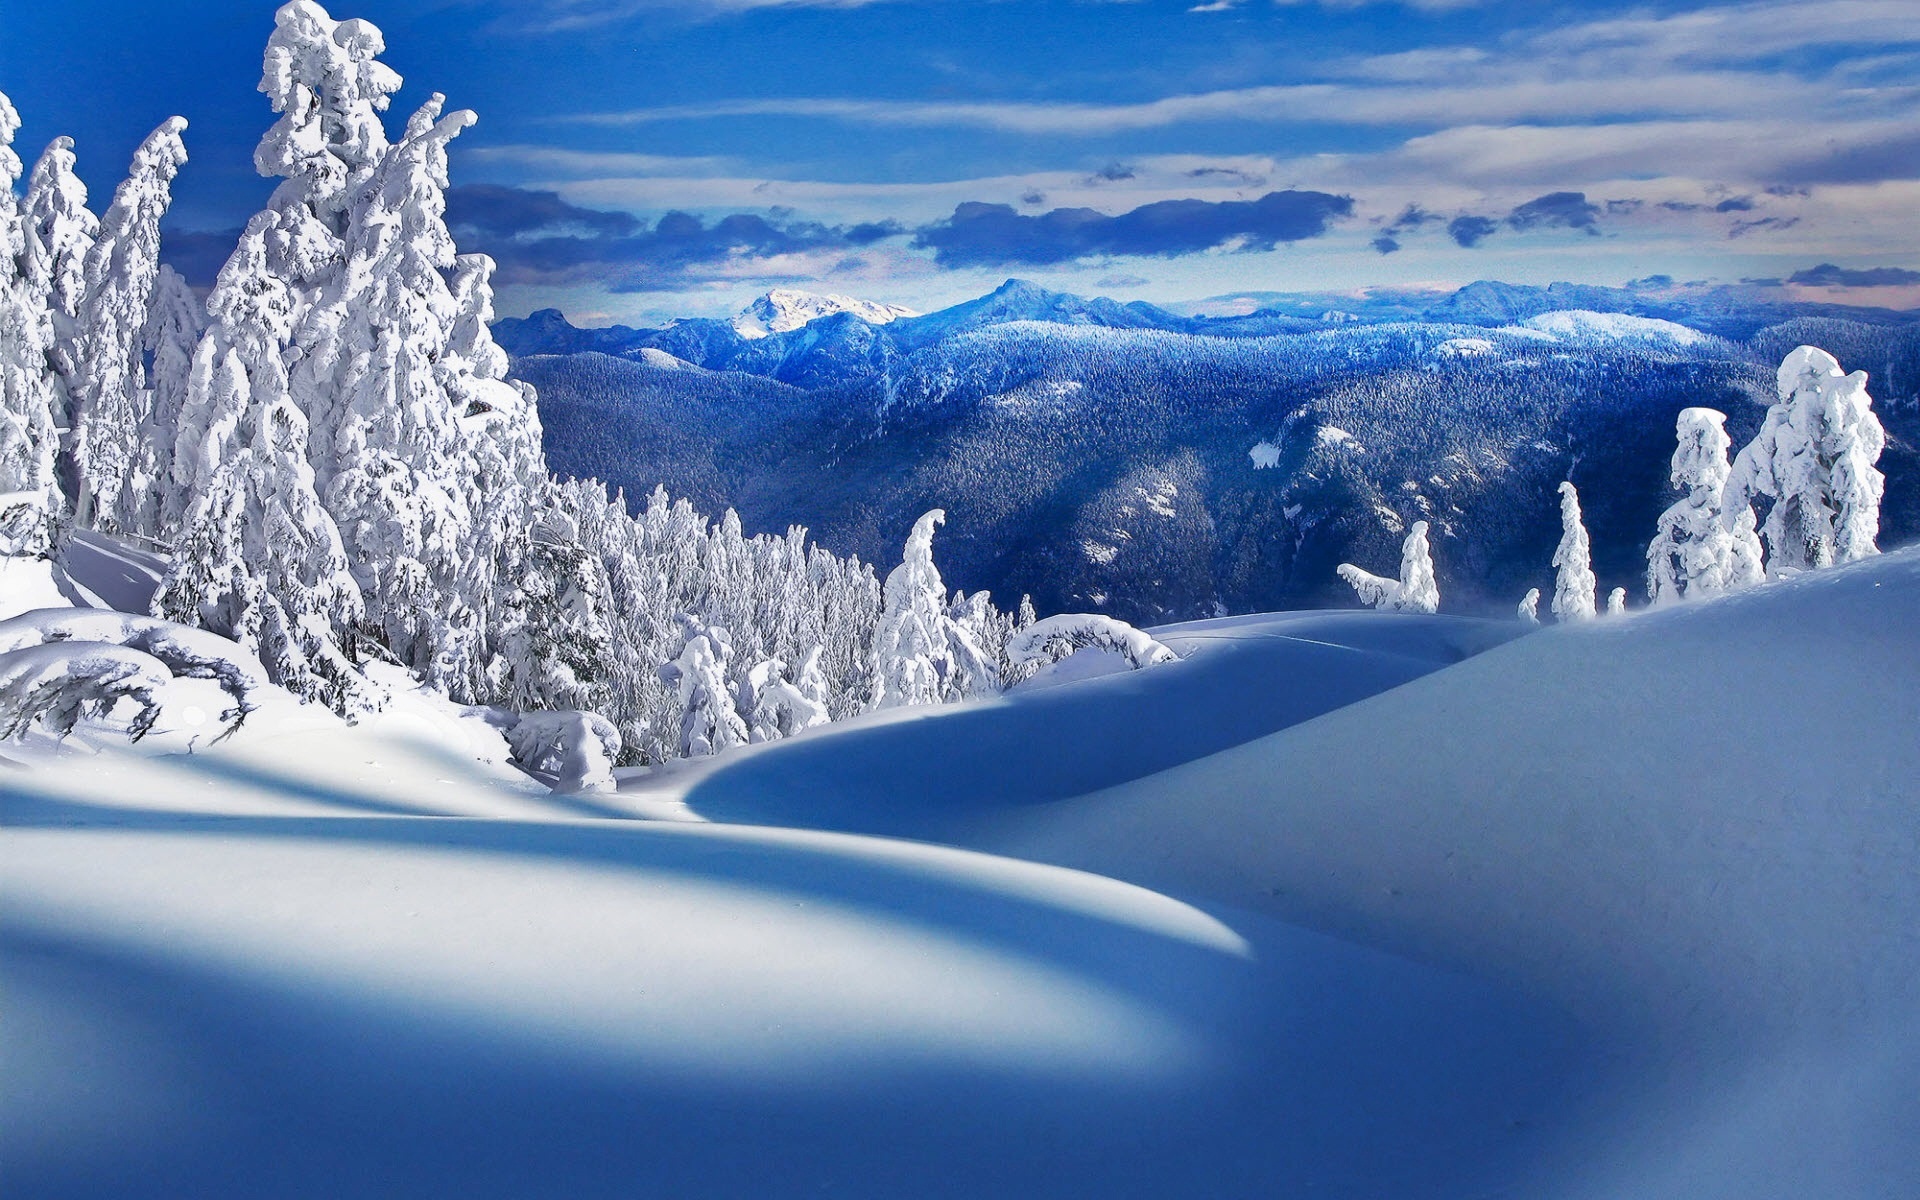 winter wallpapers hd altitude